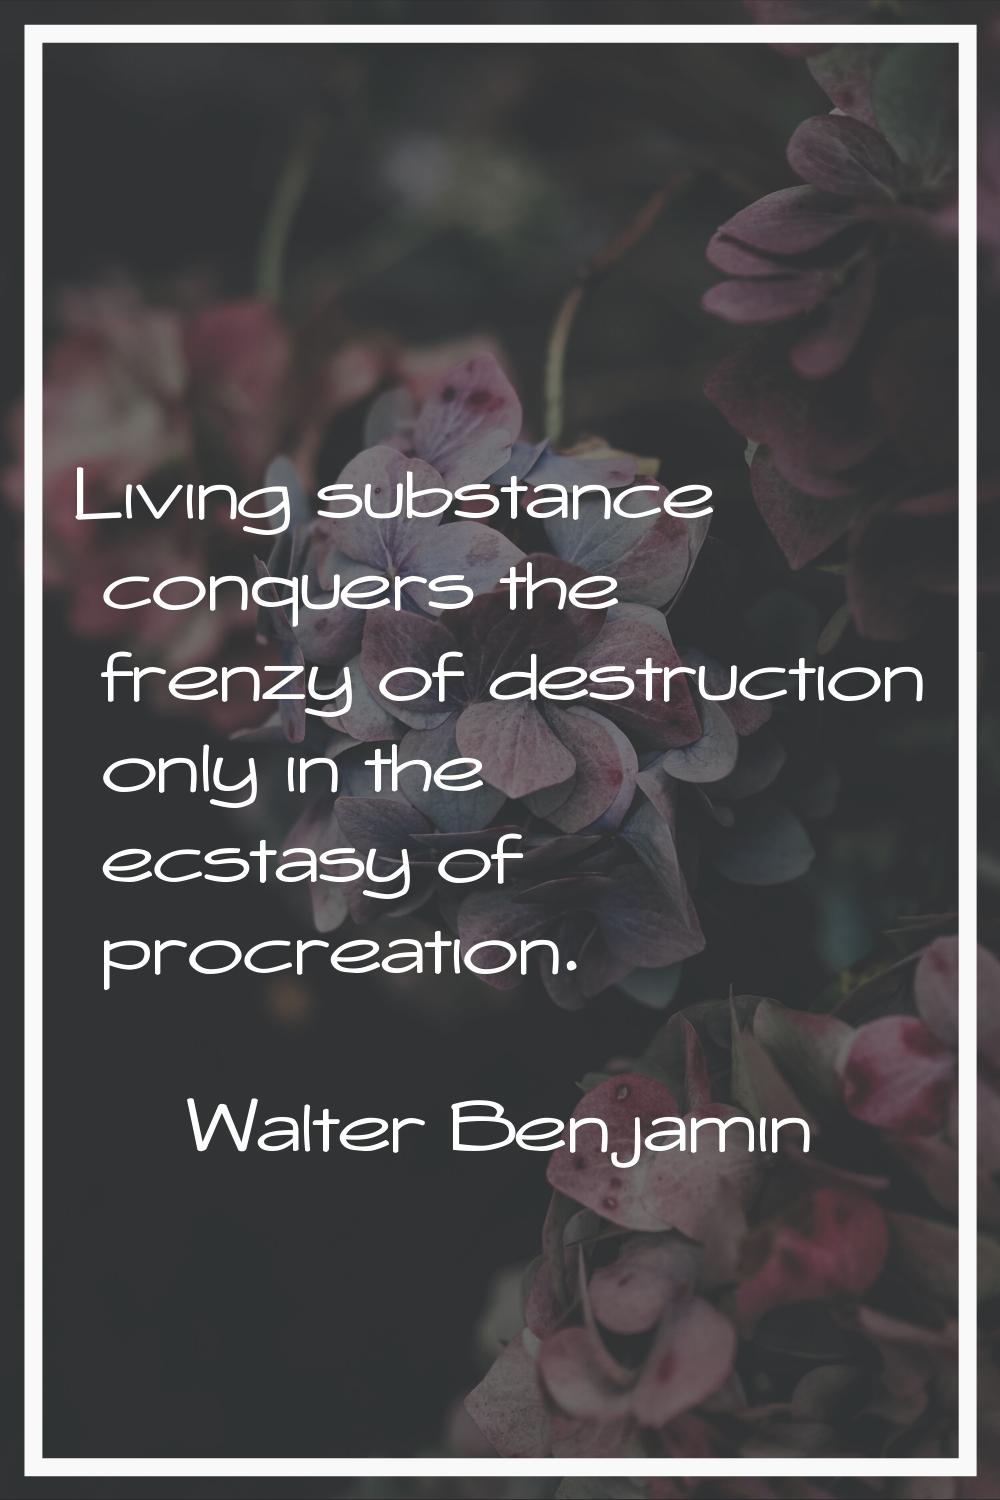 Living substance conquers the frenzy of destruction only in the ecstasy of procreation.